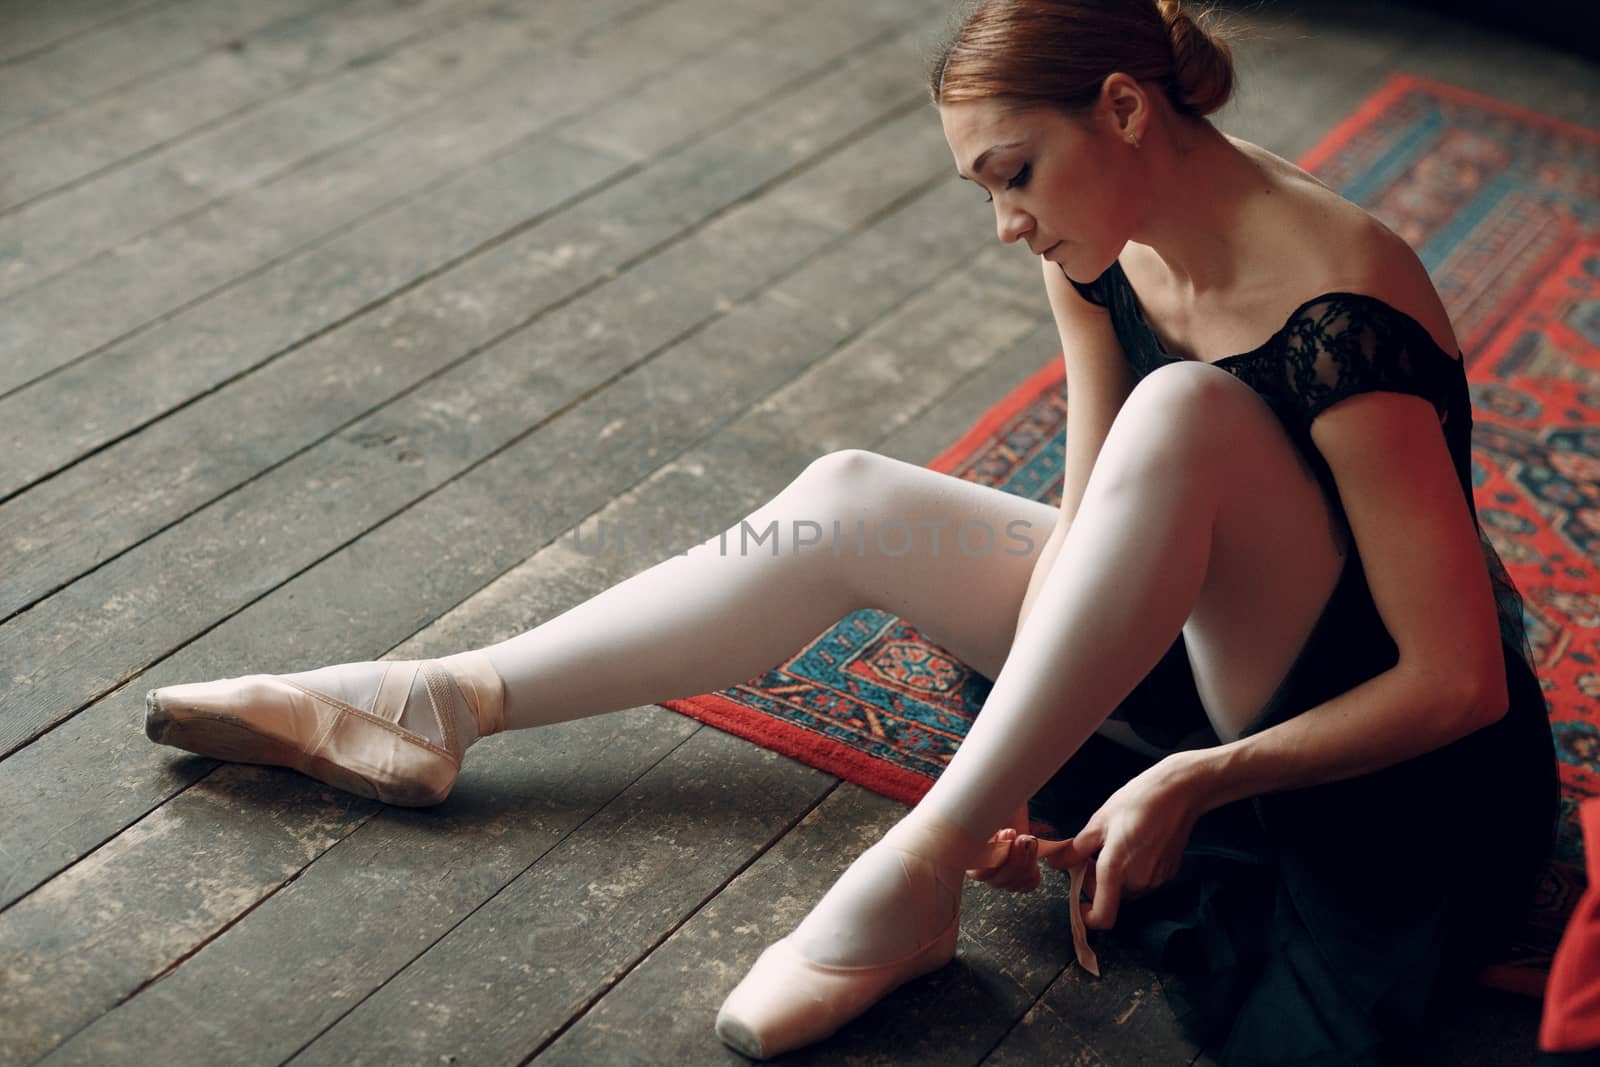 Ballerina female. Young beautiful woman ballet dancer, dressed in professional outfit, pointe shoes and black tutu.